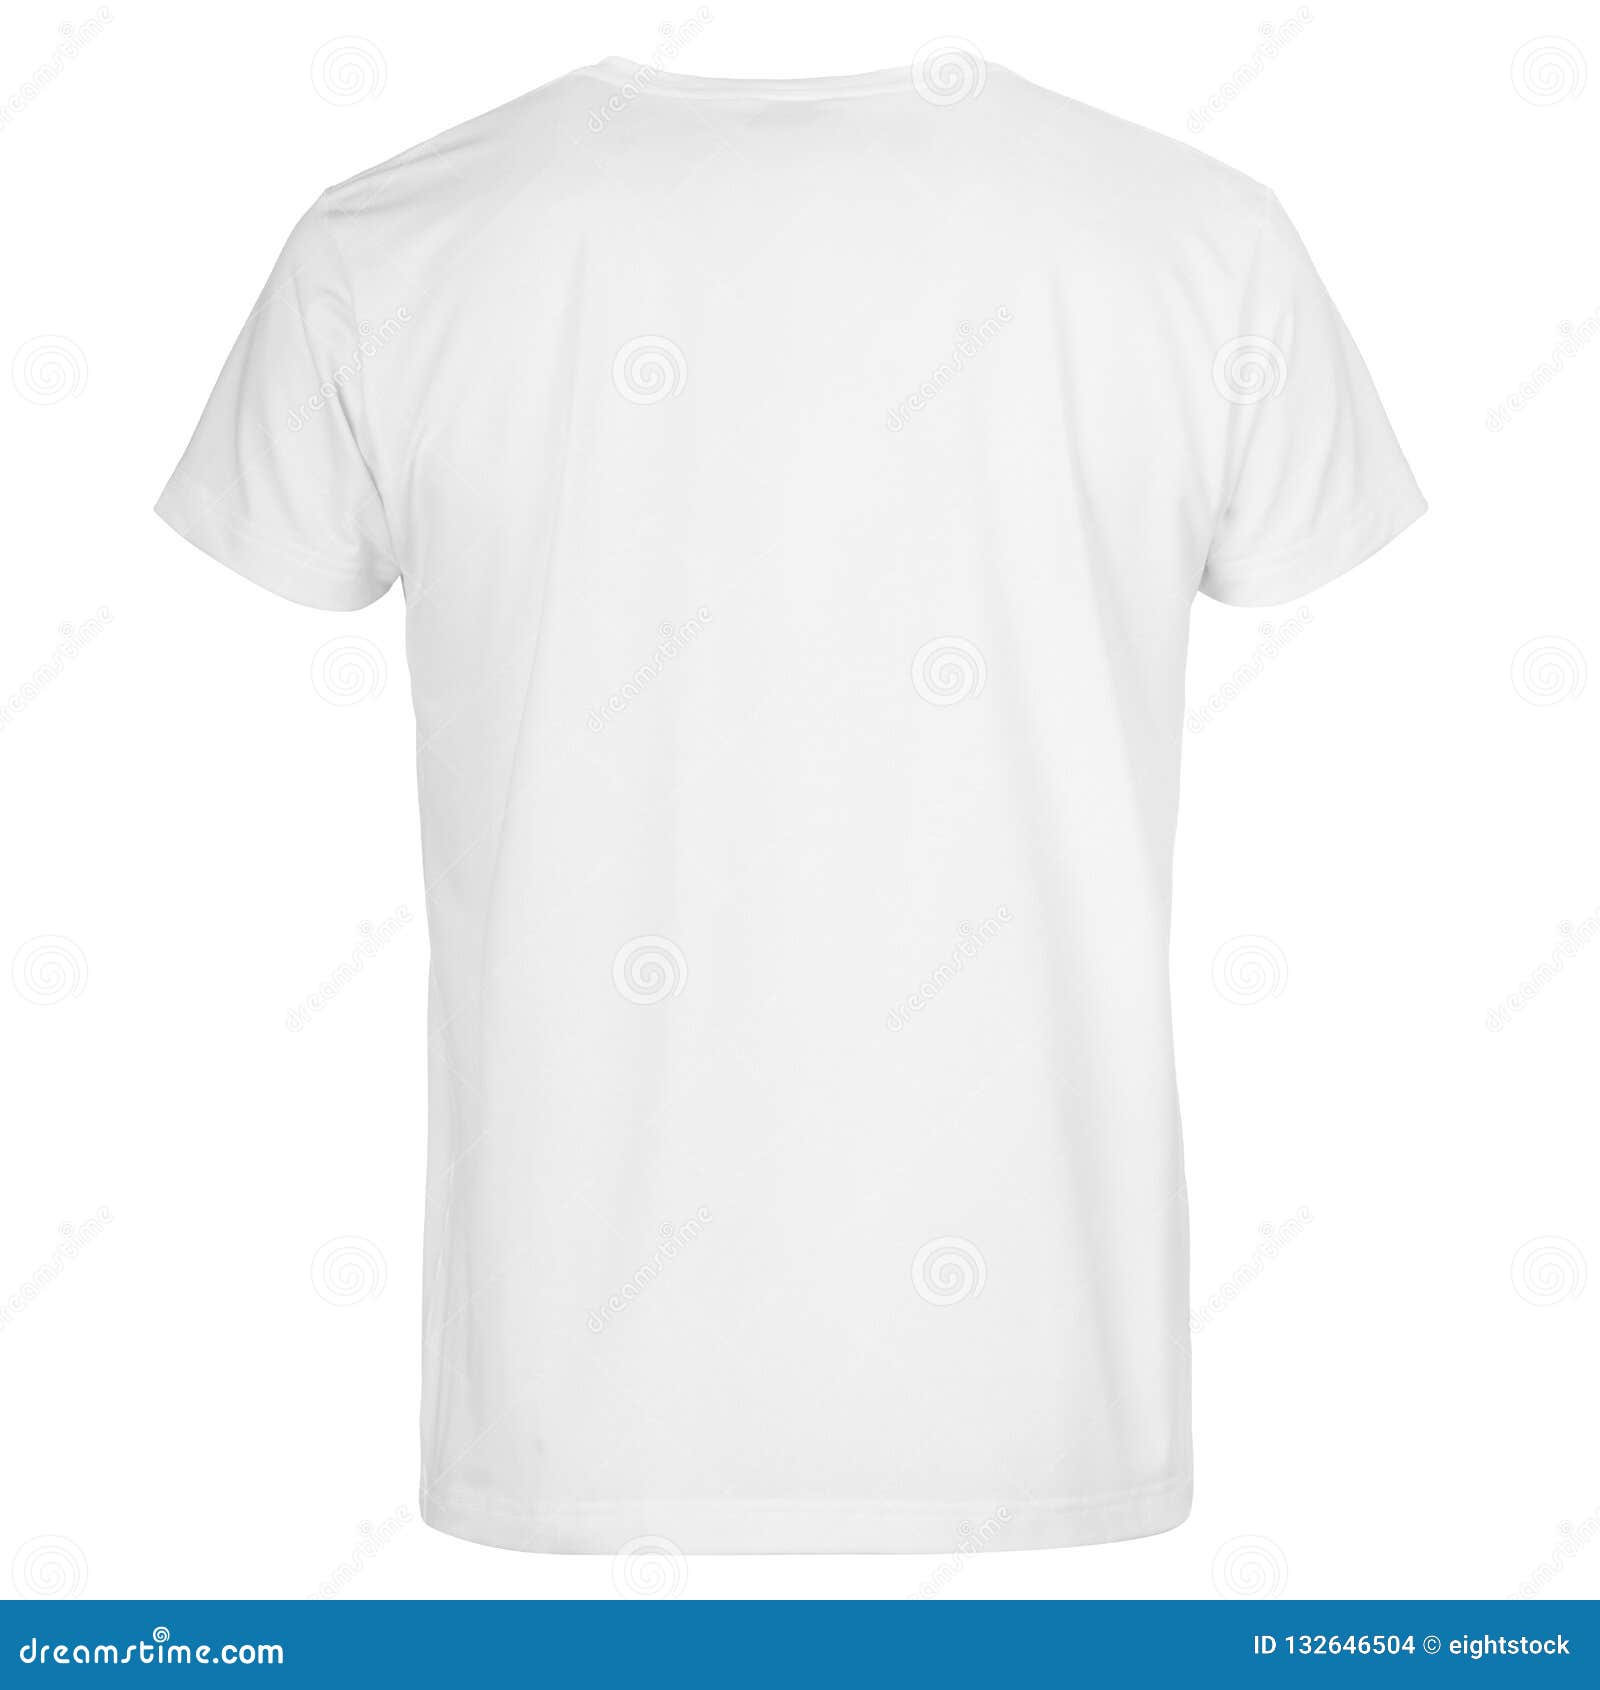 Back View of Men Cut T-shirt Isolated on White Background Stock Photo ...